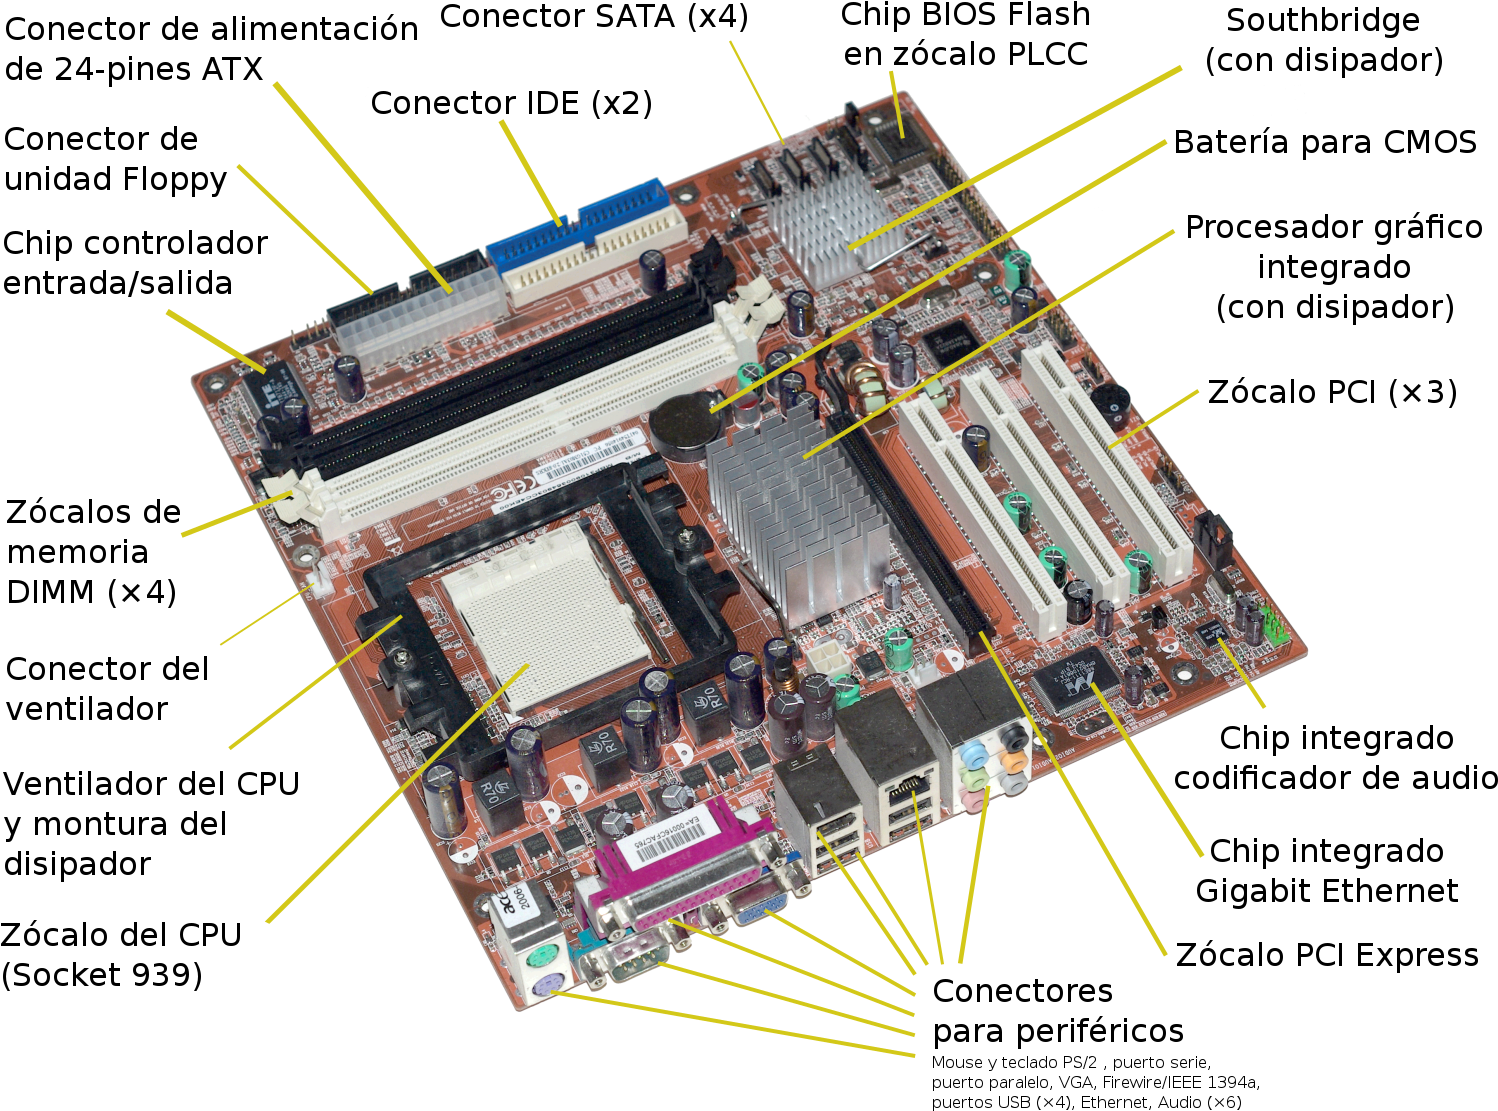 Annotated Motherboard Components